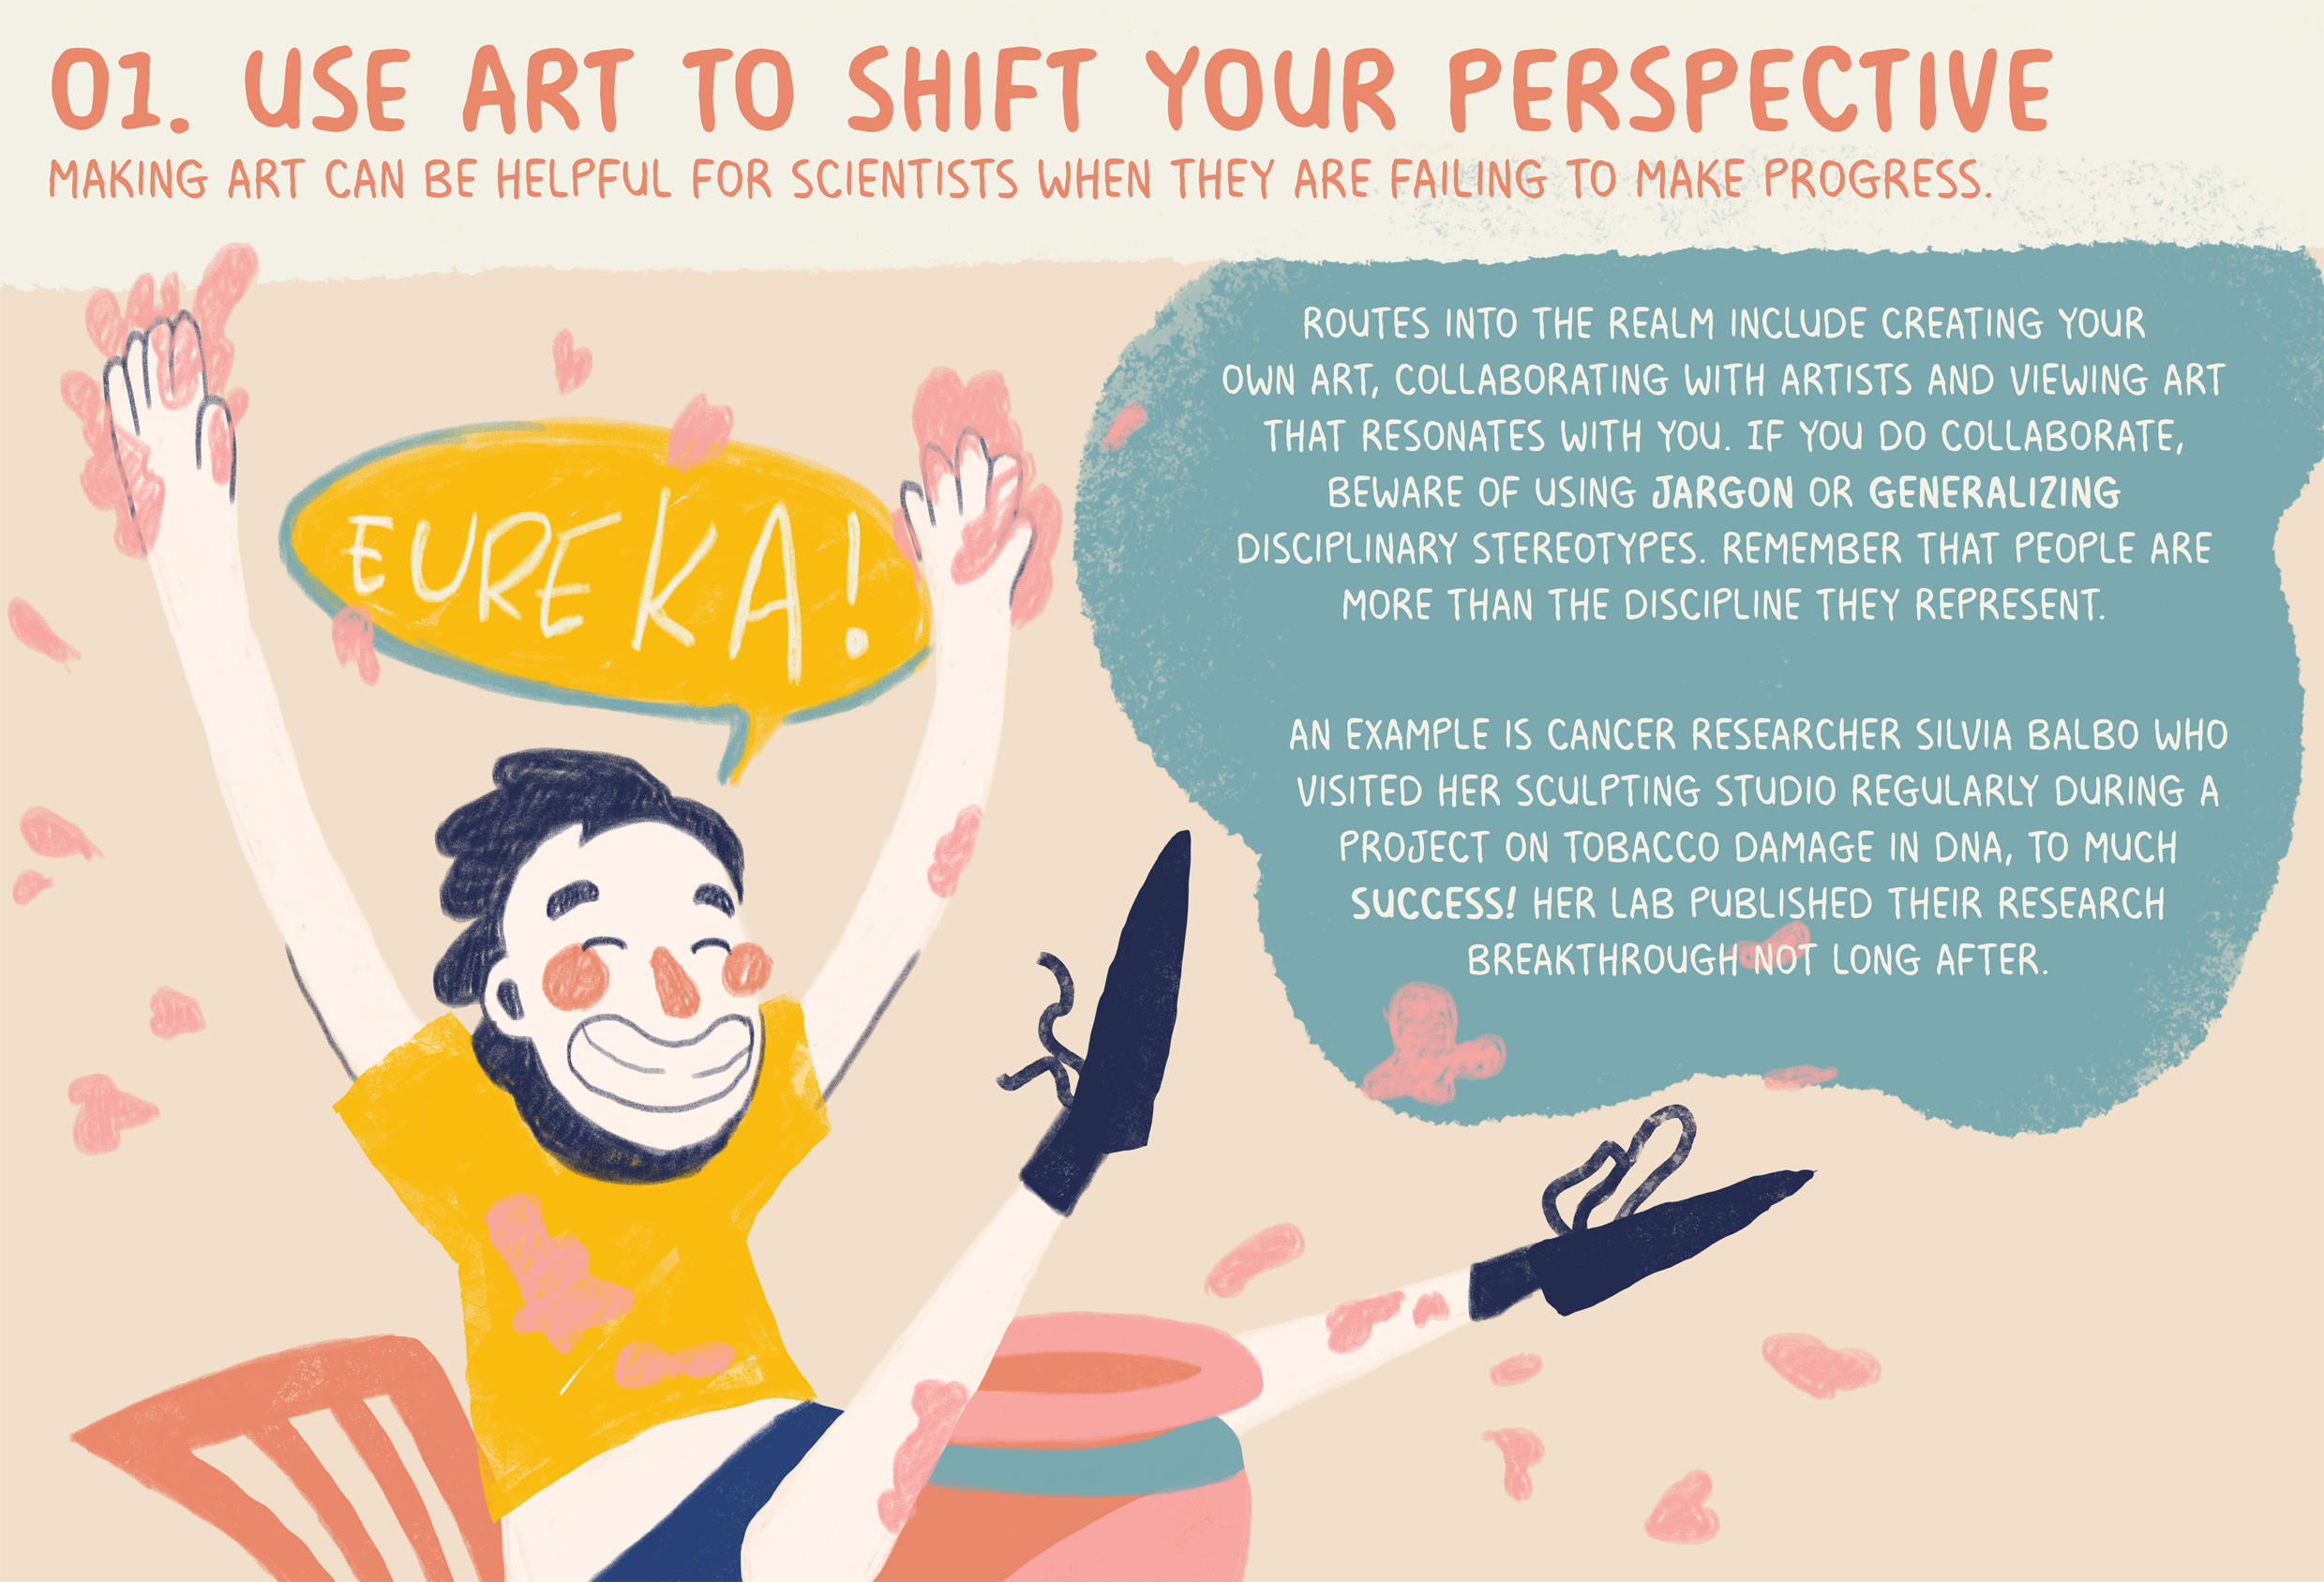 Here are 5 ways art can benefit researchers! To start, Use art to shift your perspective.